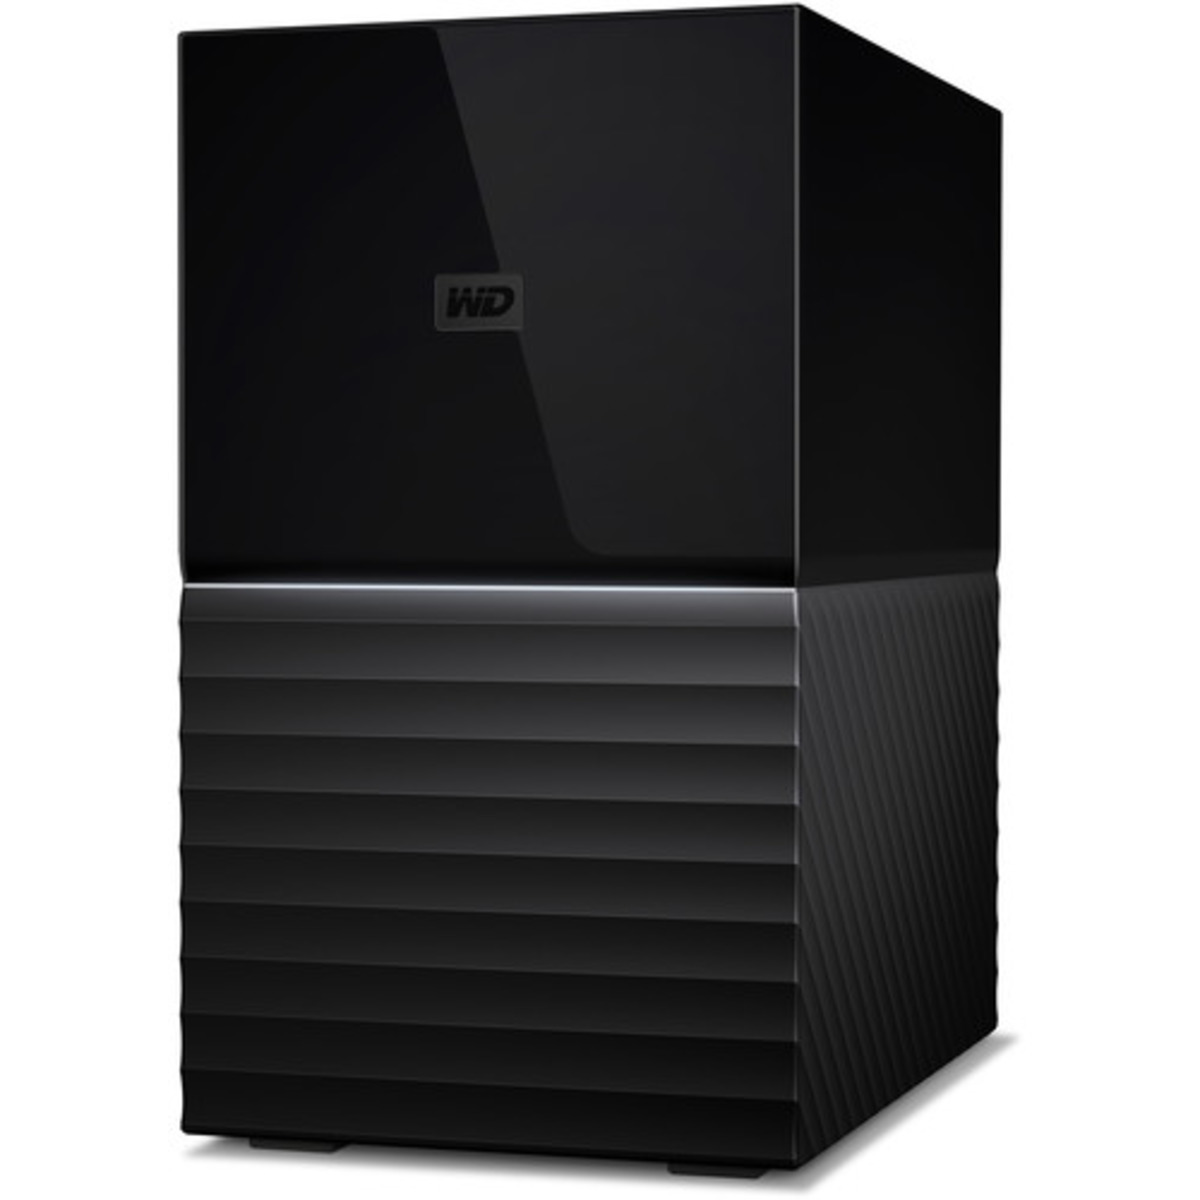 Western Digital My Book DUO Gen 2 12tb 2-Bay Desktop Personal / Basic Home / Small Office DAS - Direct Attached Storage Device 2x6tb Western Digital Red WD60EFAX 3.5 5400rpm SATA 6Gb/s HDD NAS Class Drives Installed - Burn-In Tested - ON SALE My Book DUO Gen 2